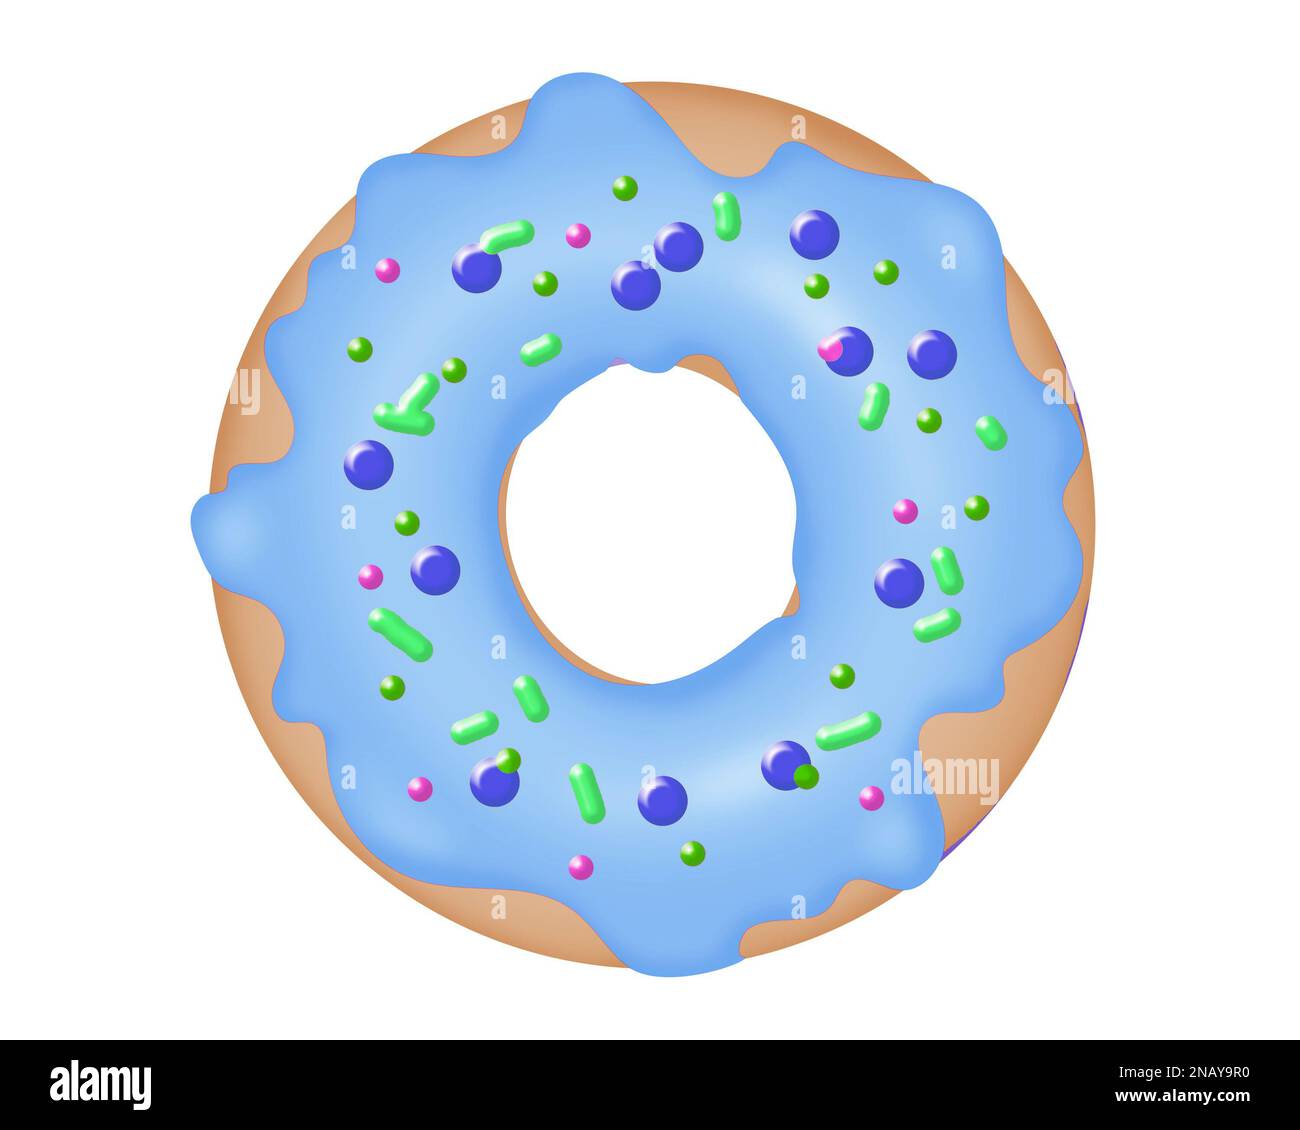 Illustration of a delicious iced donut Stock Photo